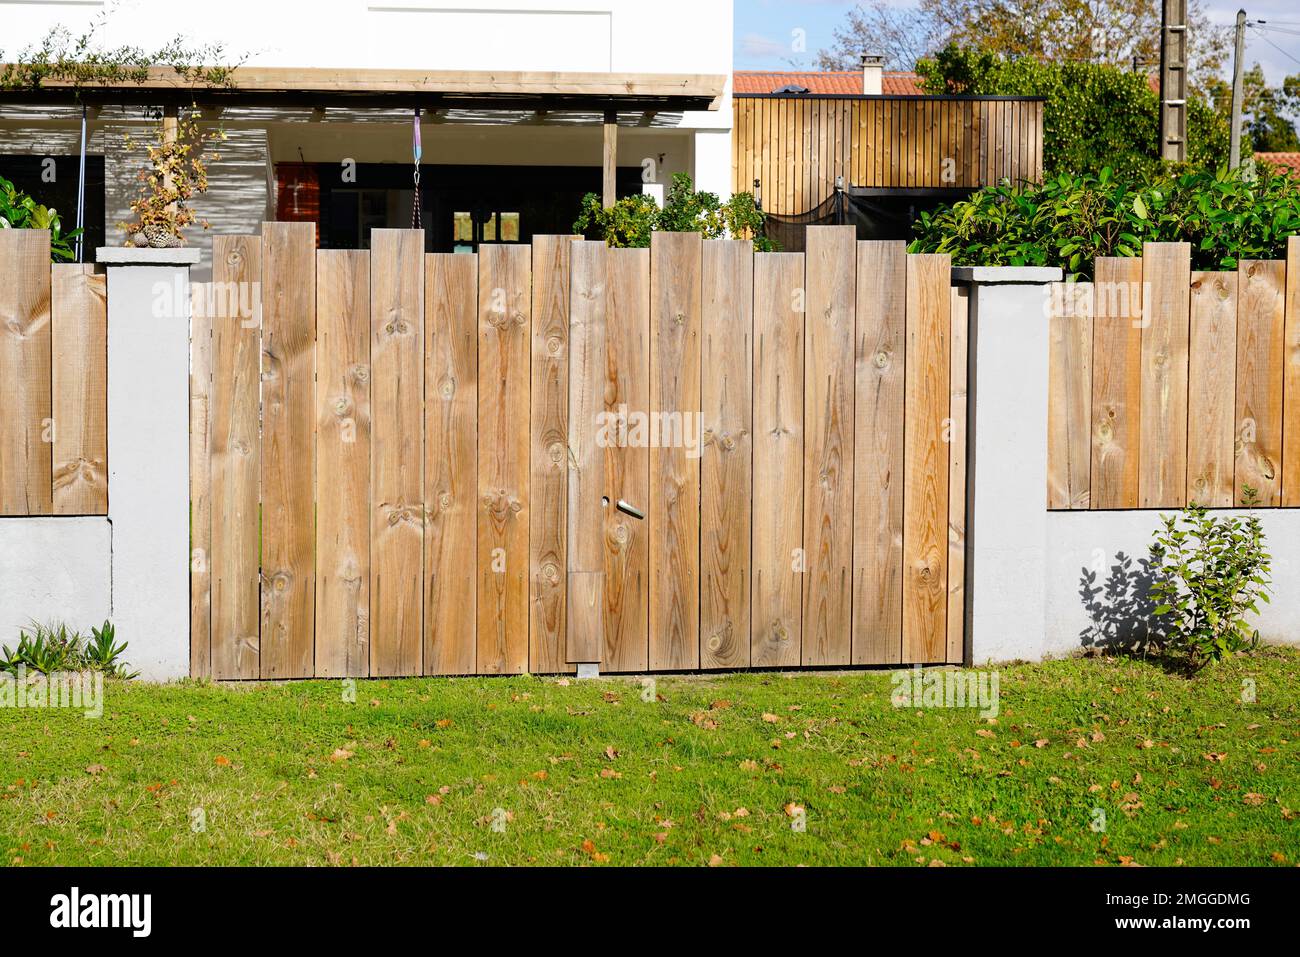 Wooden gate design style wood street view outdoor Stock Photo